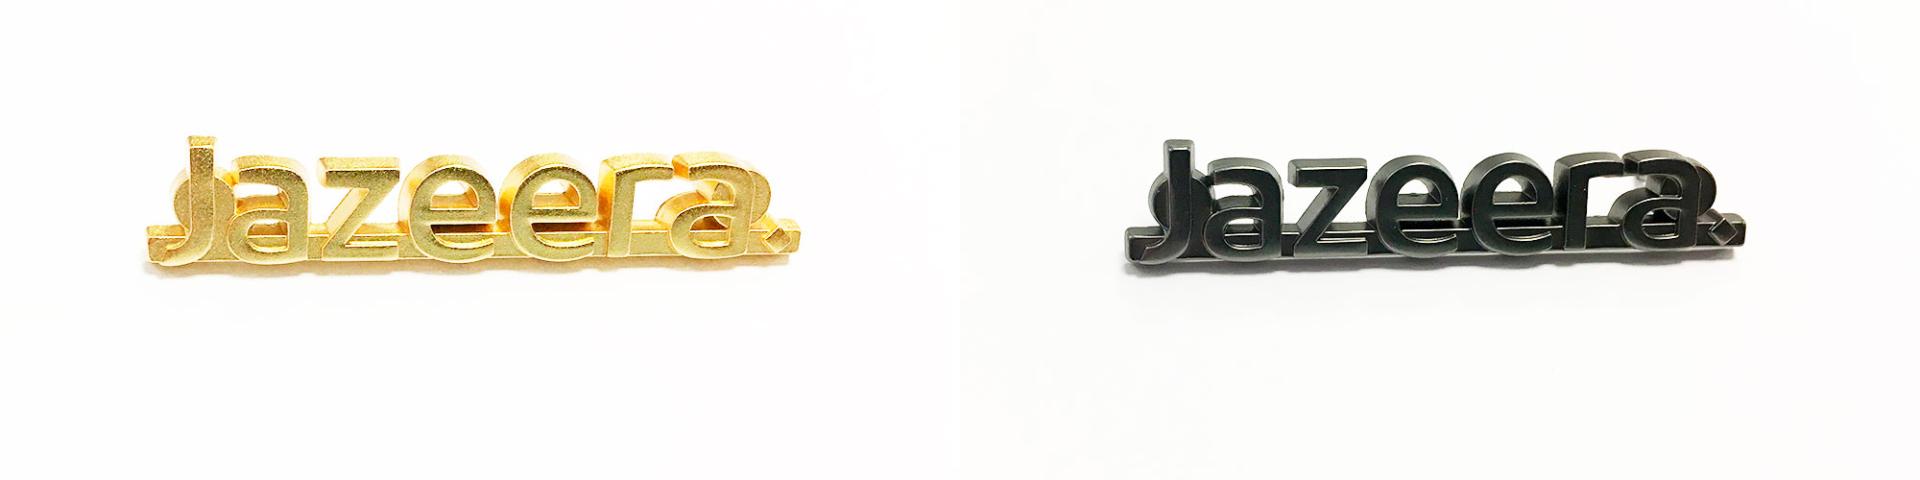 A gold-colored pin and a black pin for Jazeera Airways